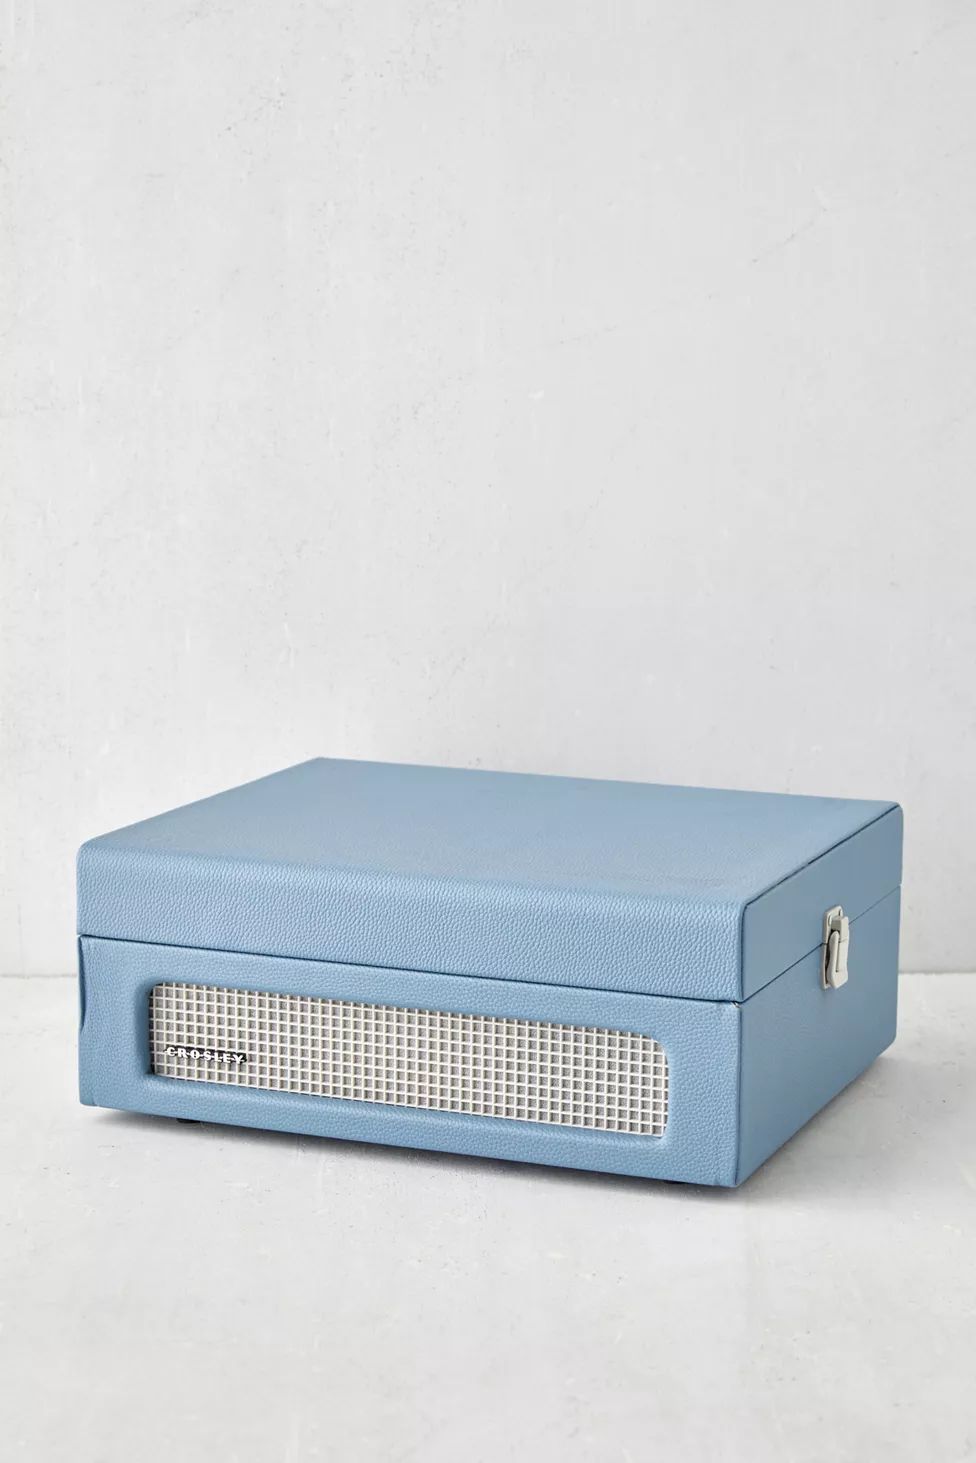 Crosley Voyager Bluetooth Record Player | Urban Outfitters (US and RoW)